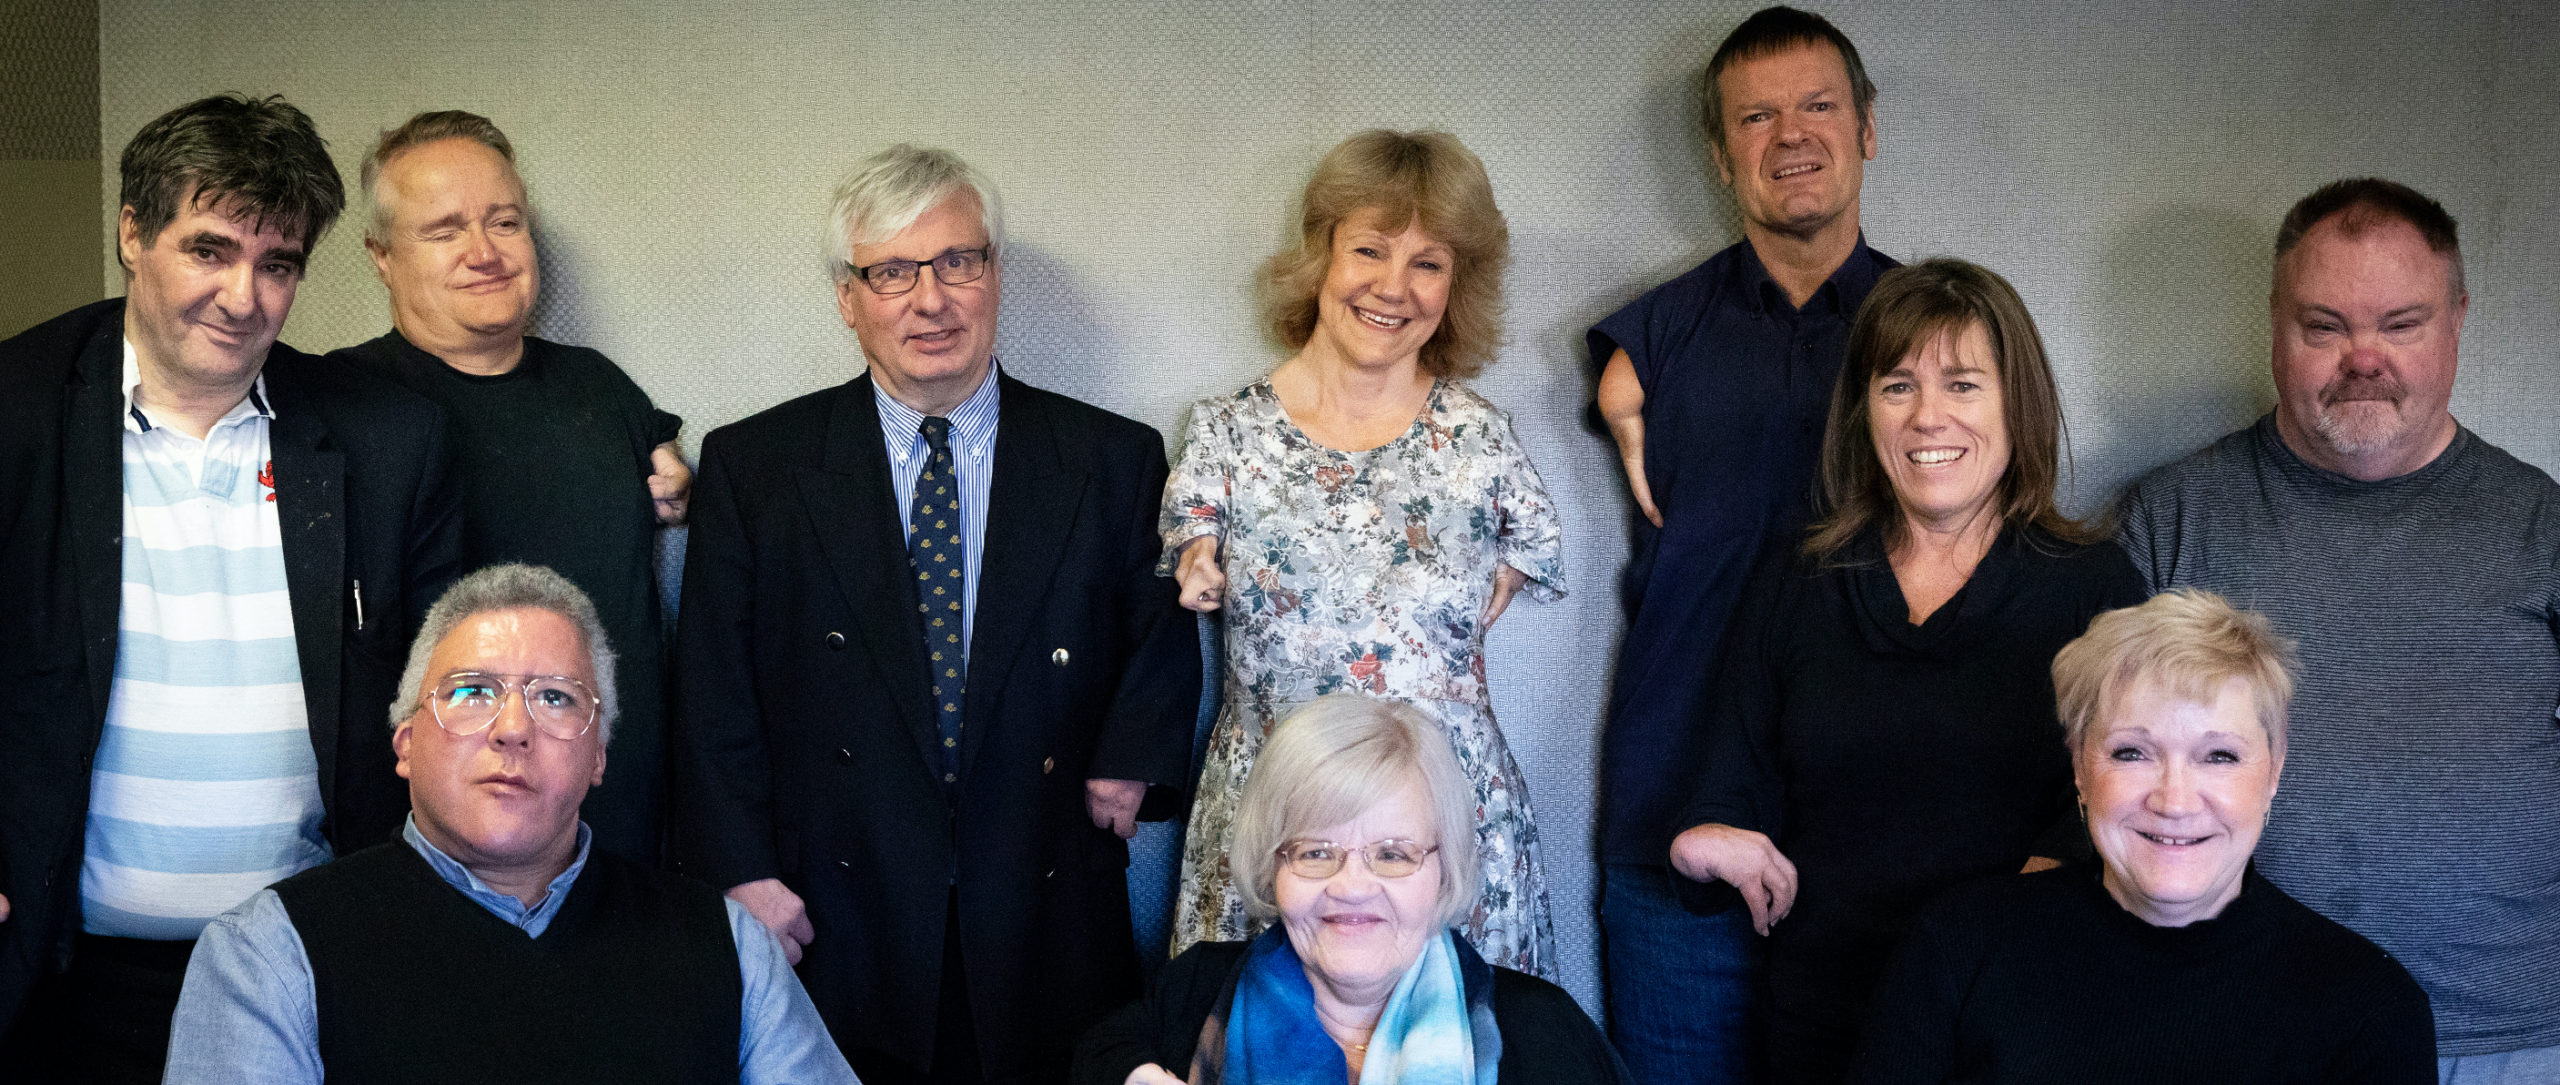 The Thalidomide Trust's National Advisory Council members 2021